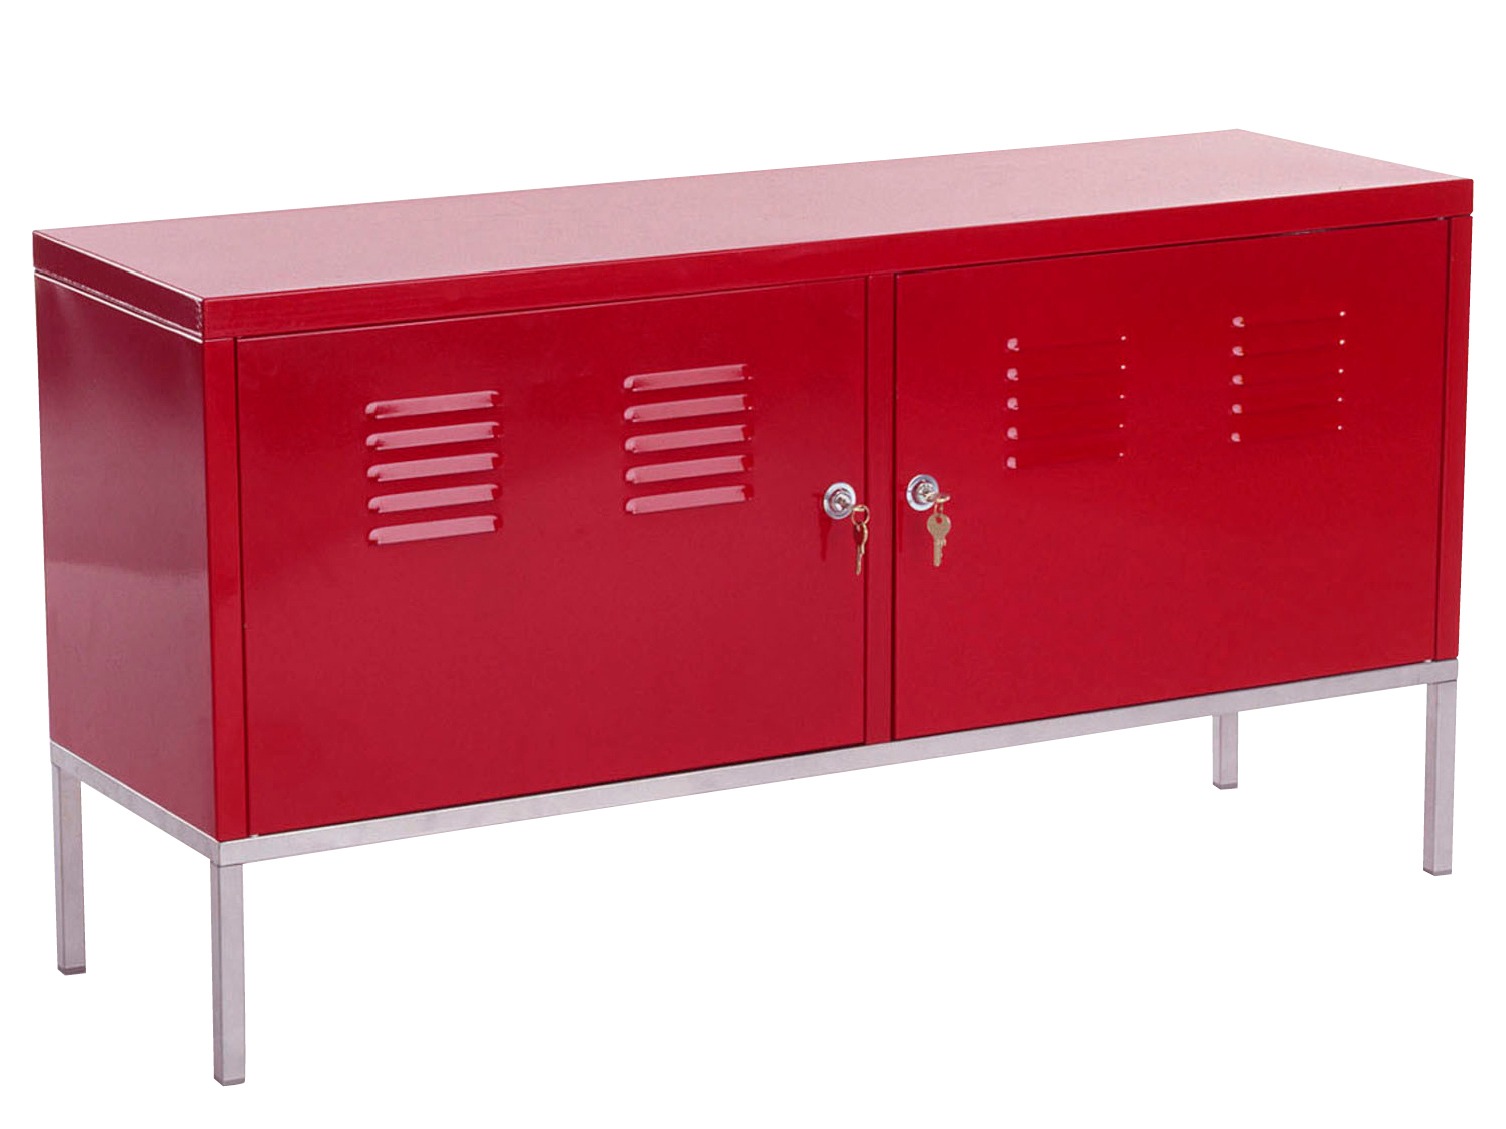 Low red metal cabinet with two doors and grey legs.